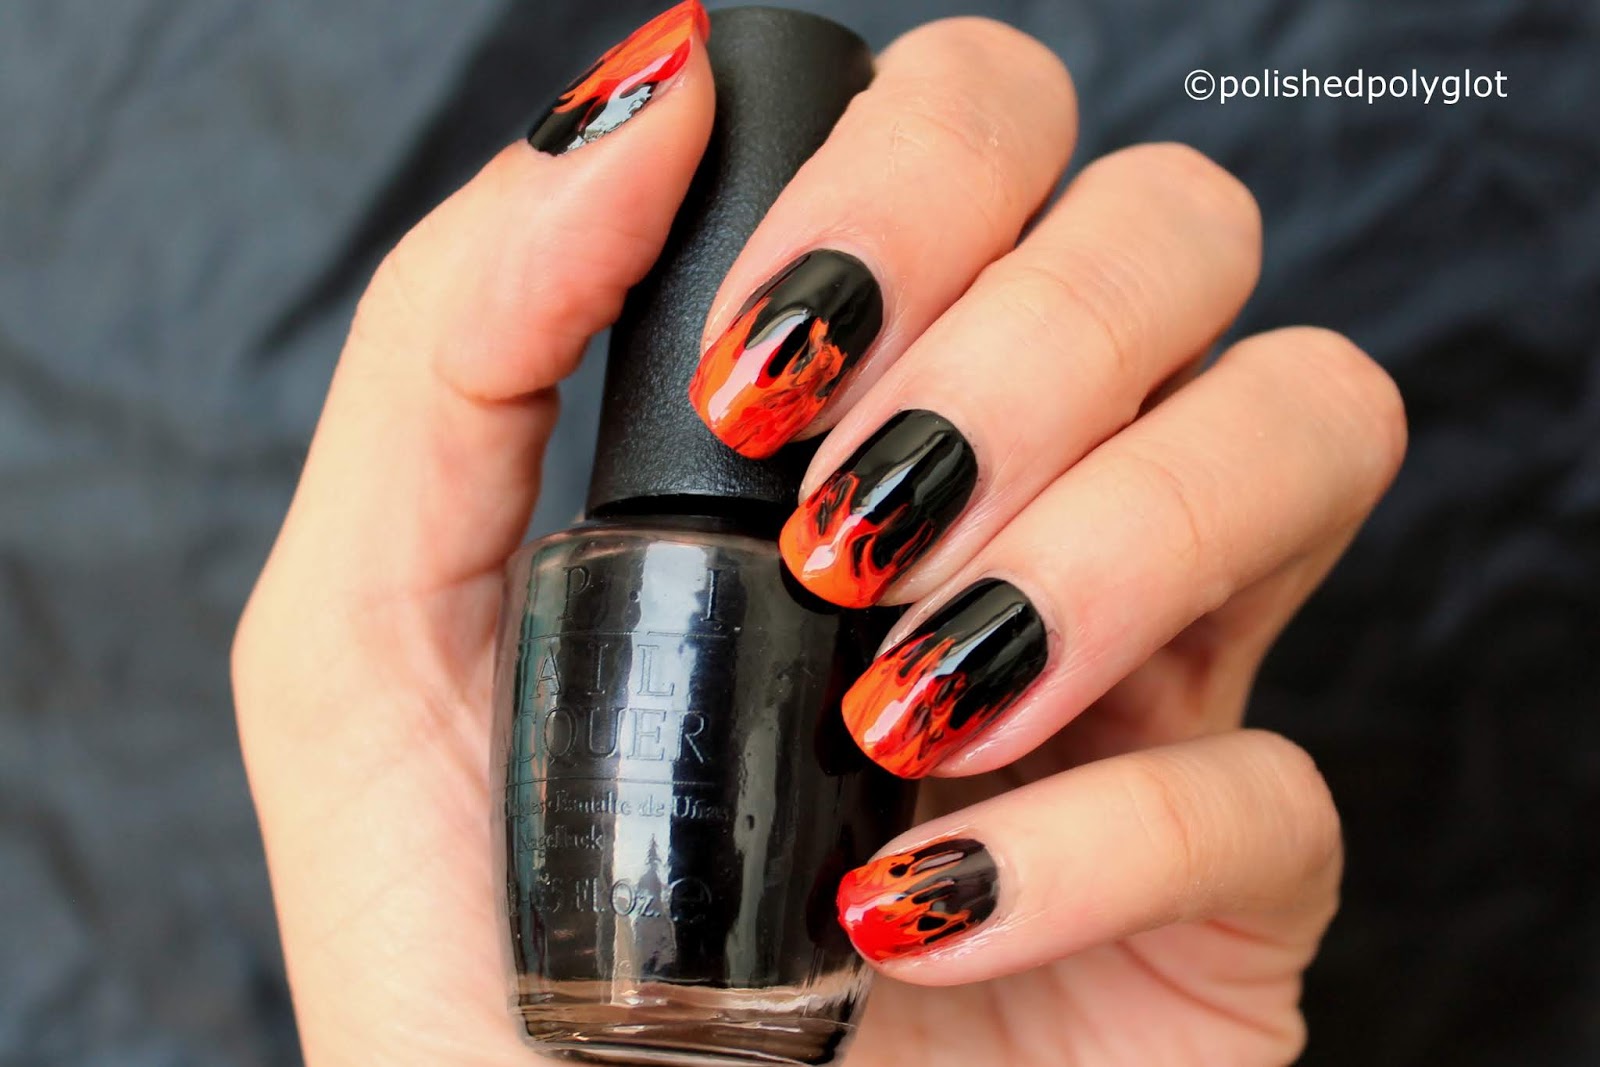 Nail Art │Black, Red And Orange Fire Flames Manicure / Polished Polyglot